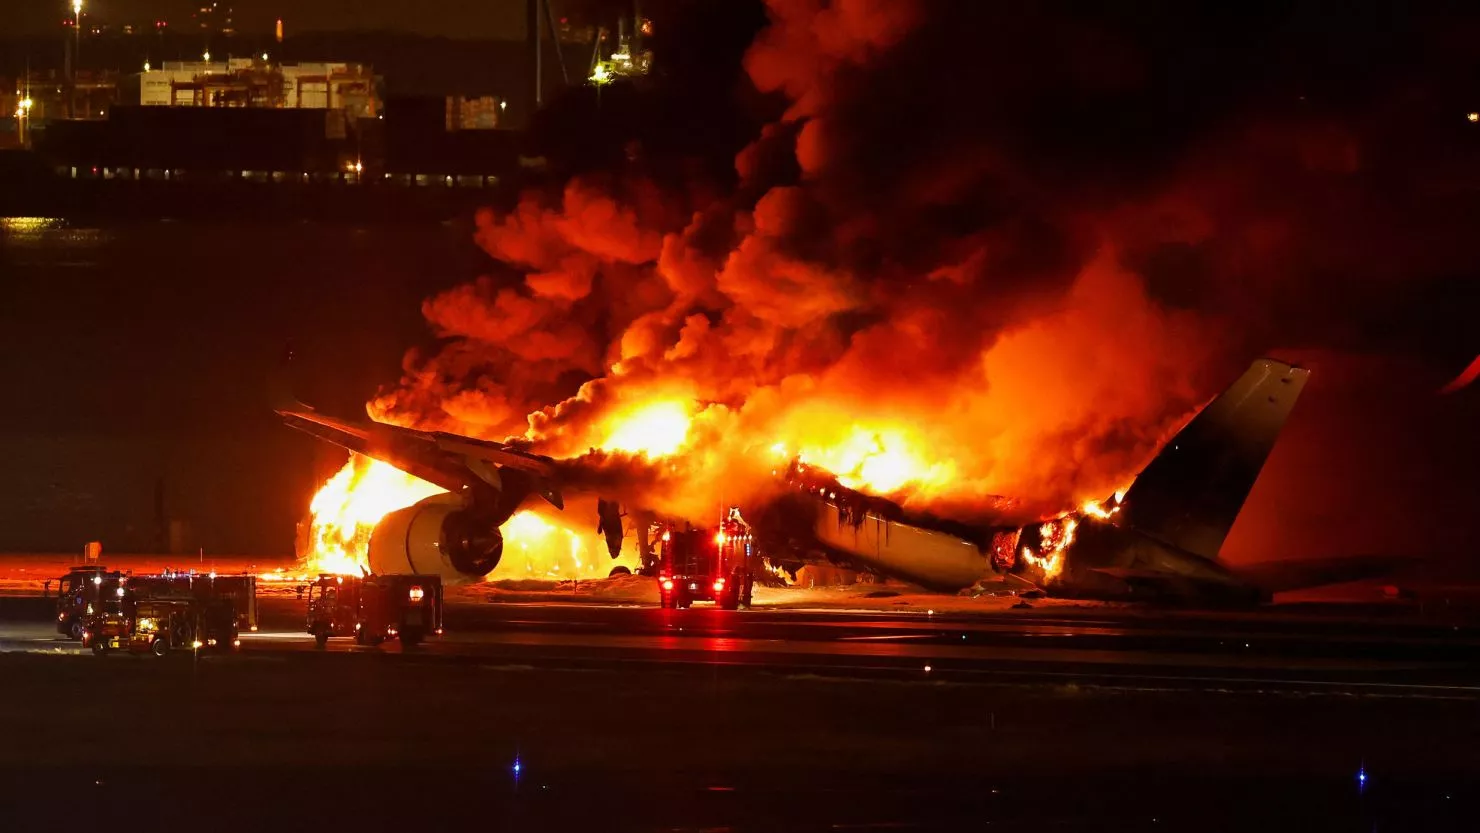 plane-catches-fire-at-the-runway-of-japans-haneda-airport-passengers-reportedly-got-out-safely